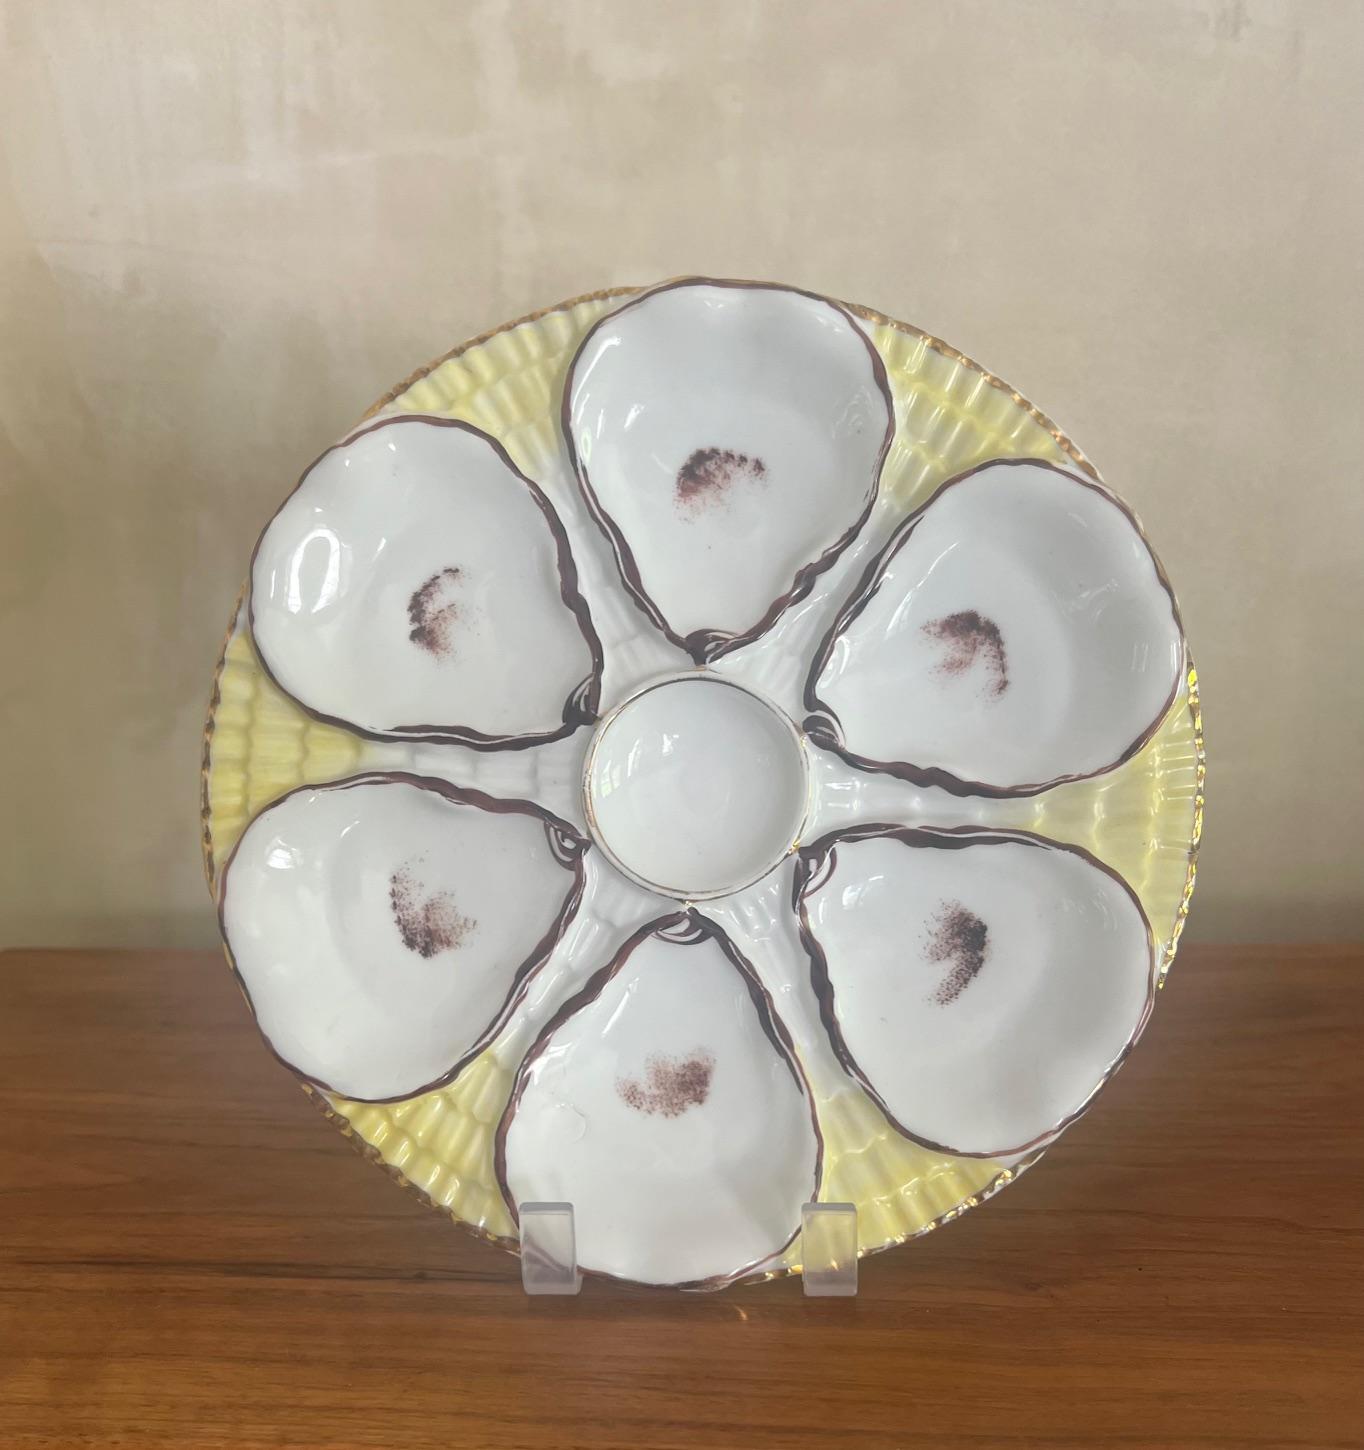 Antique oyster plate made by Carl Tielsch in the late 19th century in Germany.  The plate has six wells for oysters and a center well for lemon wedges. The background is a vivid yellow with a gold rim. Hallmarked on the bottom for Carl Tielsch.